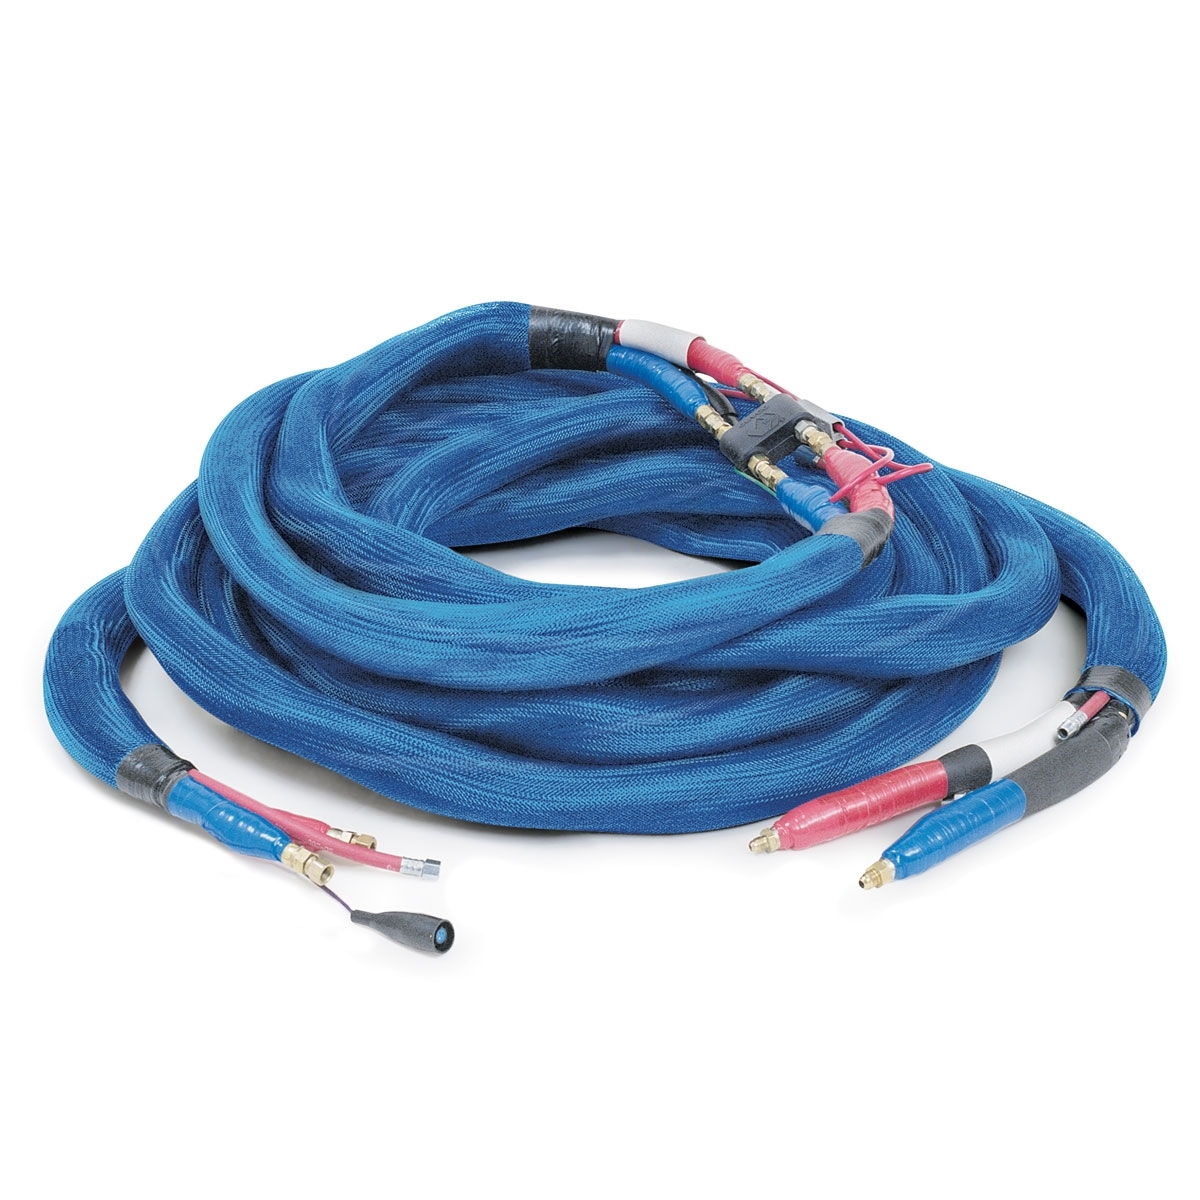 15m The Improved Protection cover for 50ft heated hose 